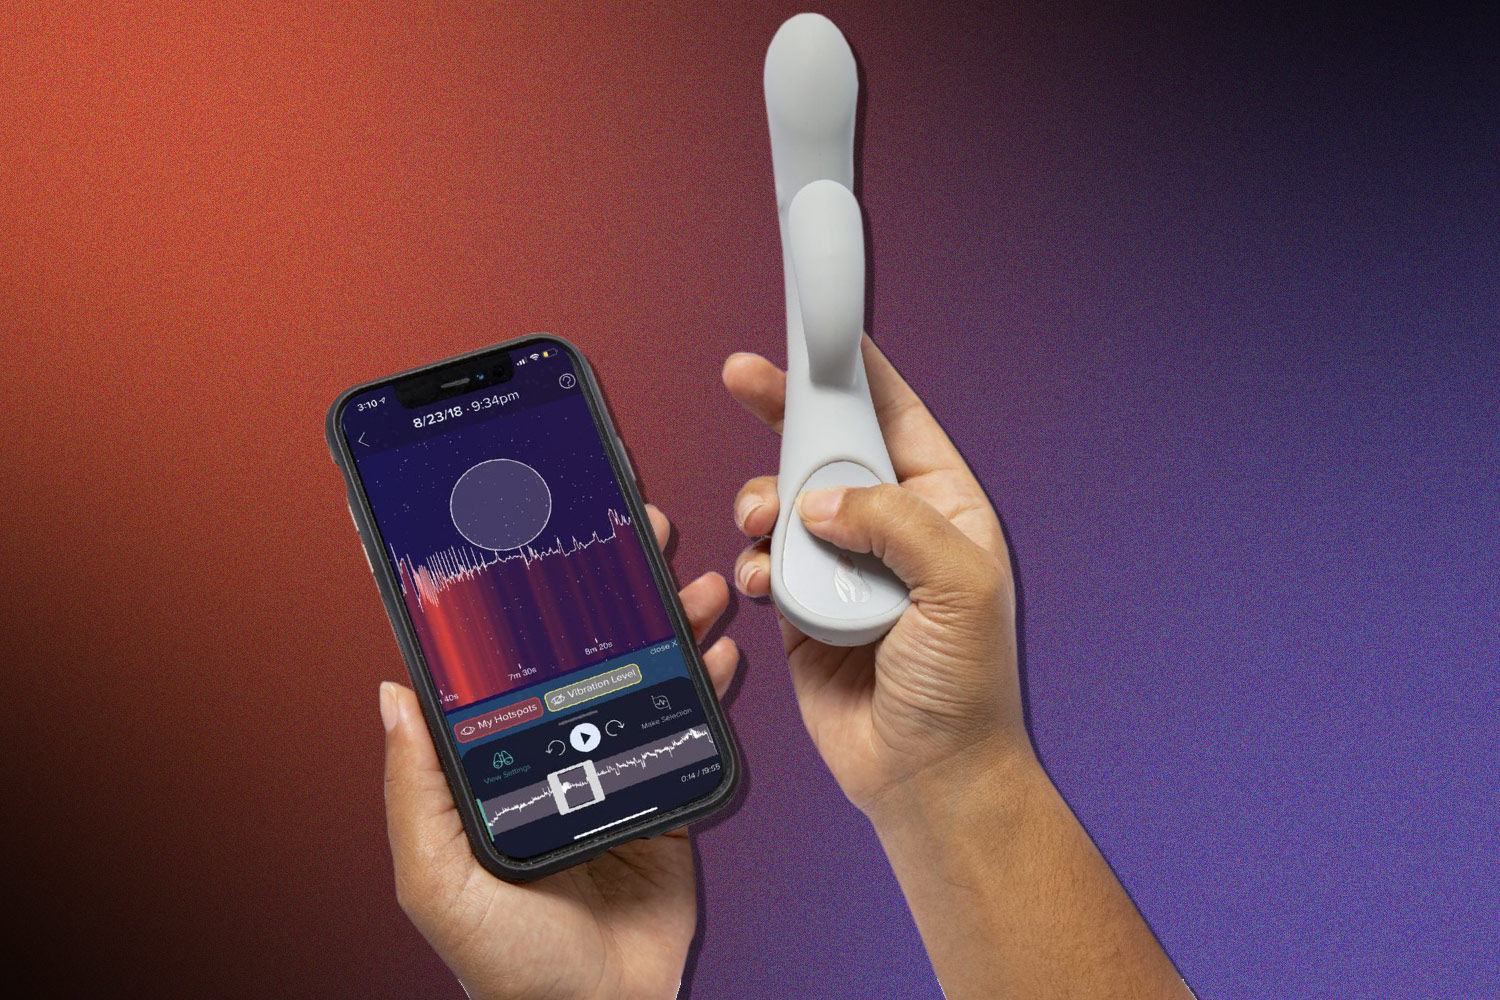 hands hold a white vibrator and a phone displaying data